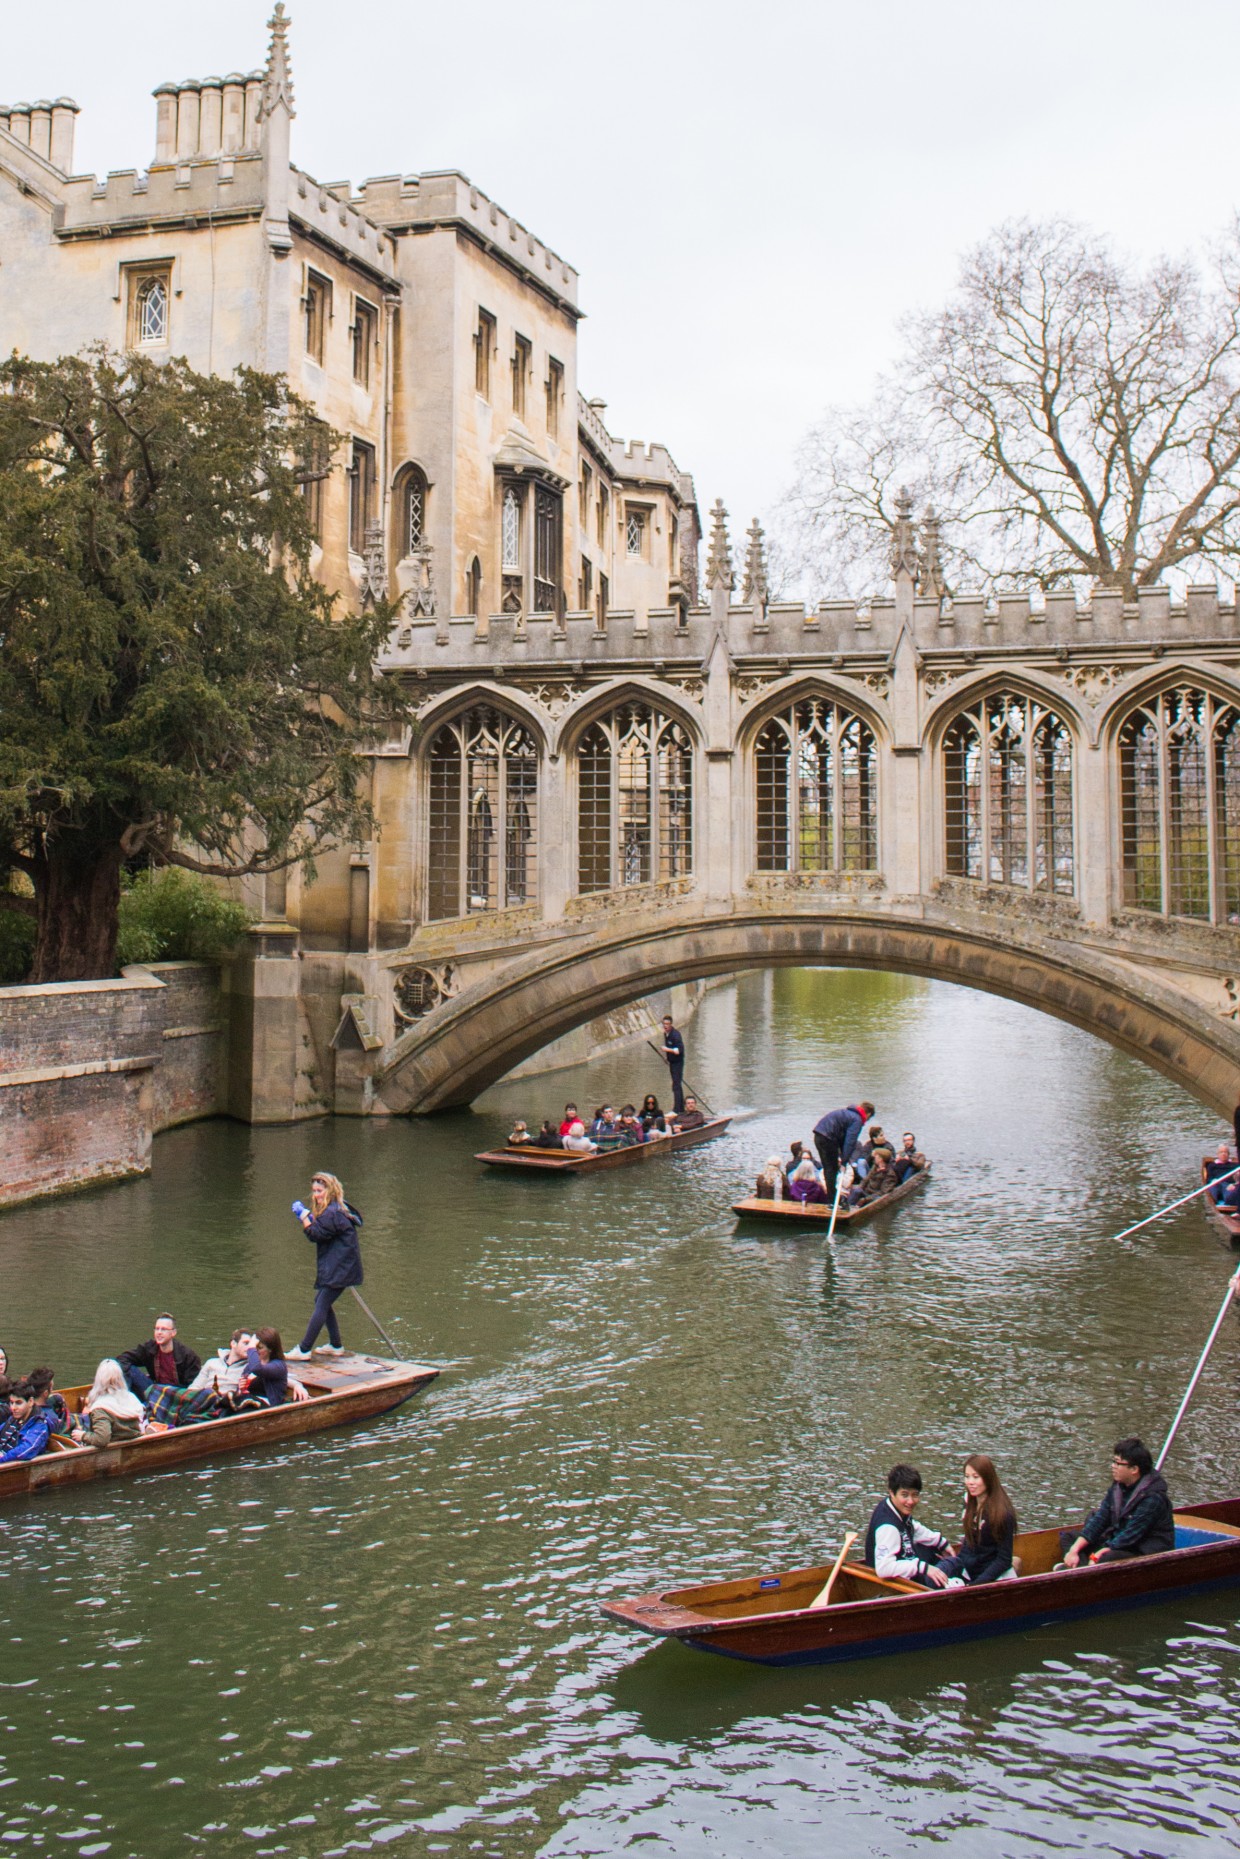 visit cambridge in a day